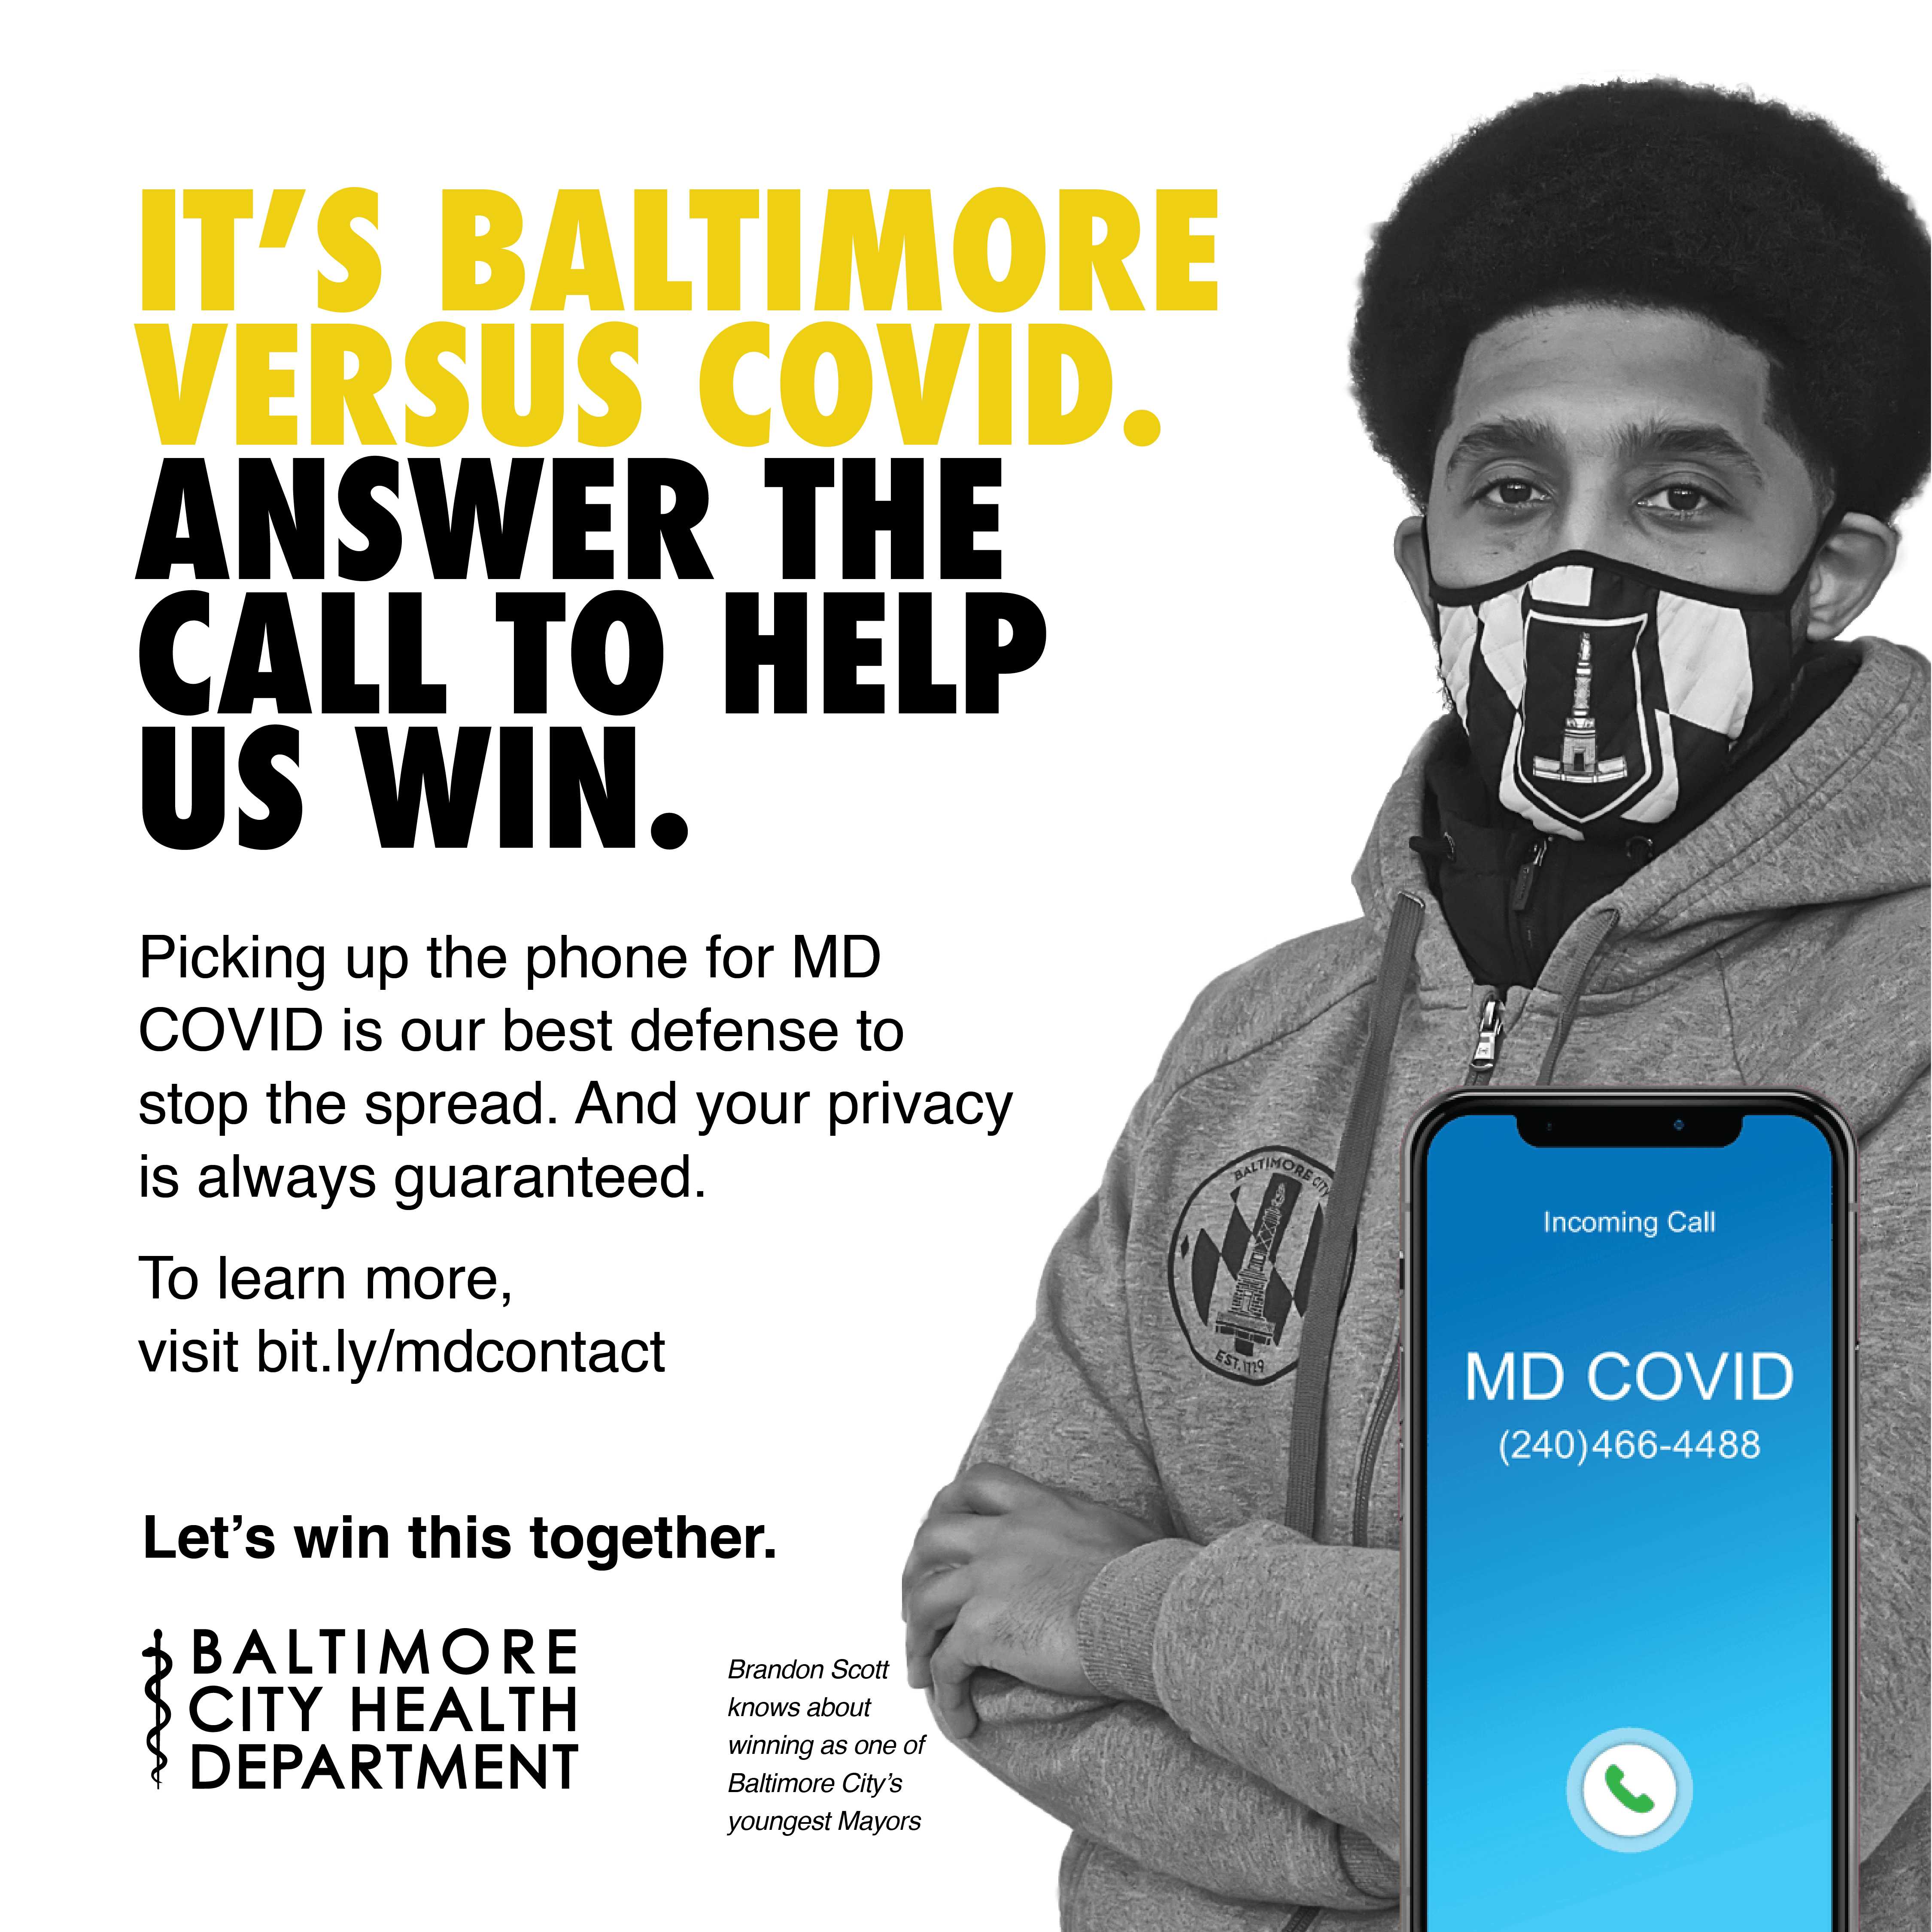 Image: Mayor Brandon Scott with hands folded, wearing a face mask. A blue phone screen with contact "MD COVID" calling. Text reads "Its Baltimore versus COVID, Answer the Call to Help US Win. Picking up the phone for MD COVID is our best defense to stop the spread. And your privacy is always guaranteed. Baltimore City Health Department 